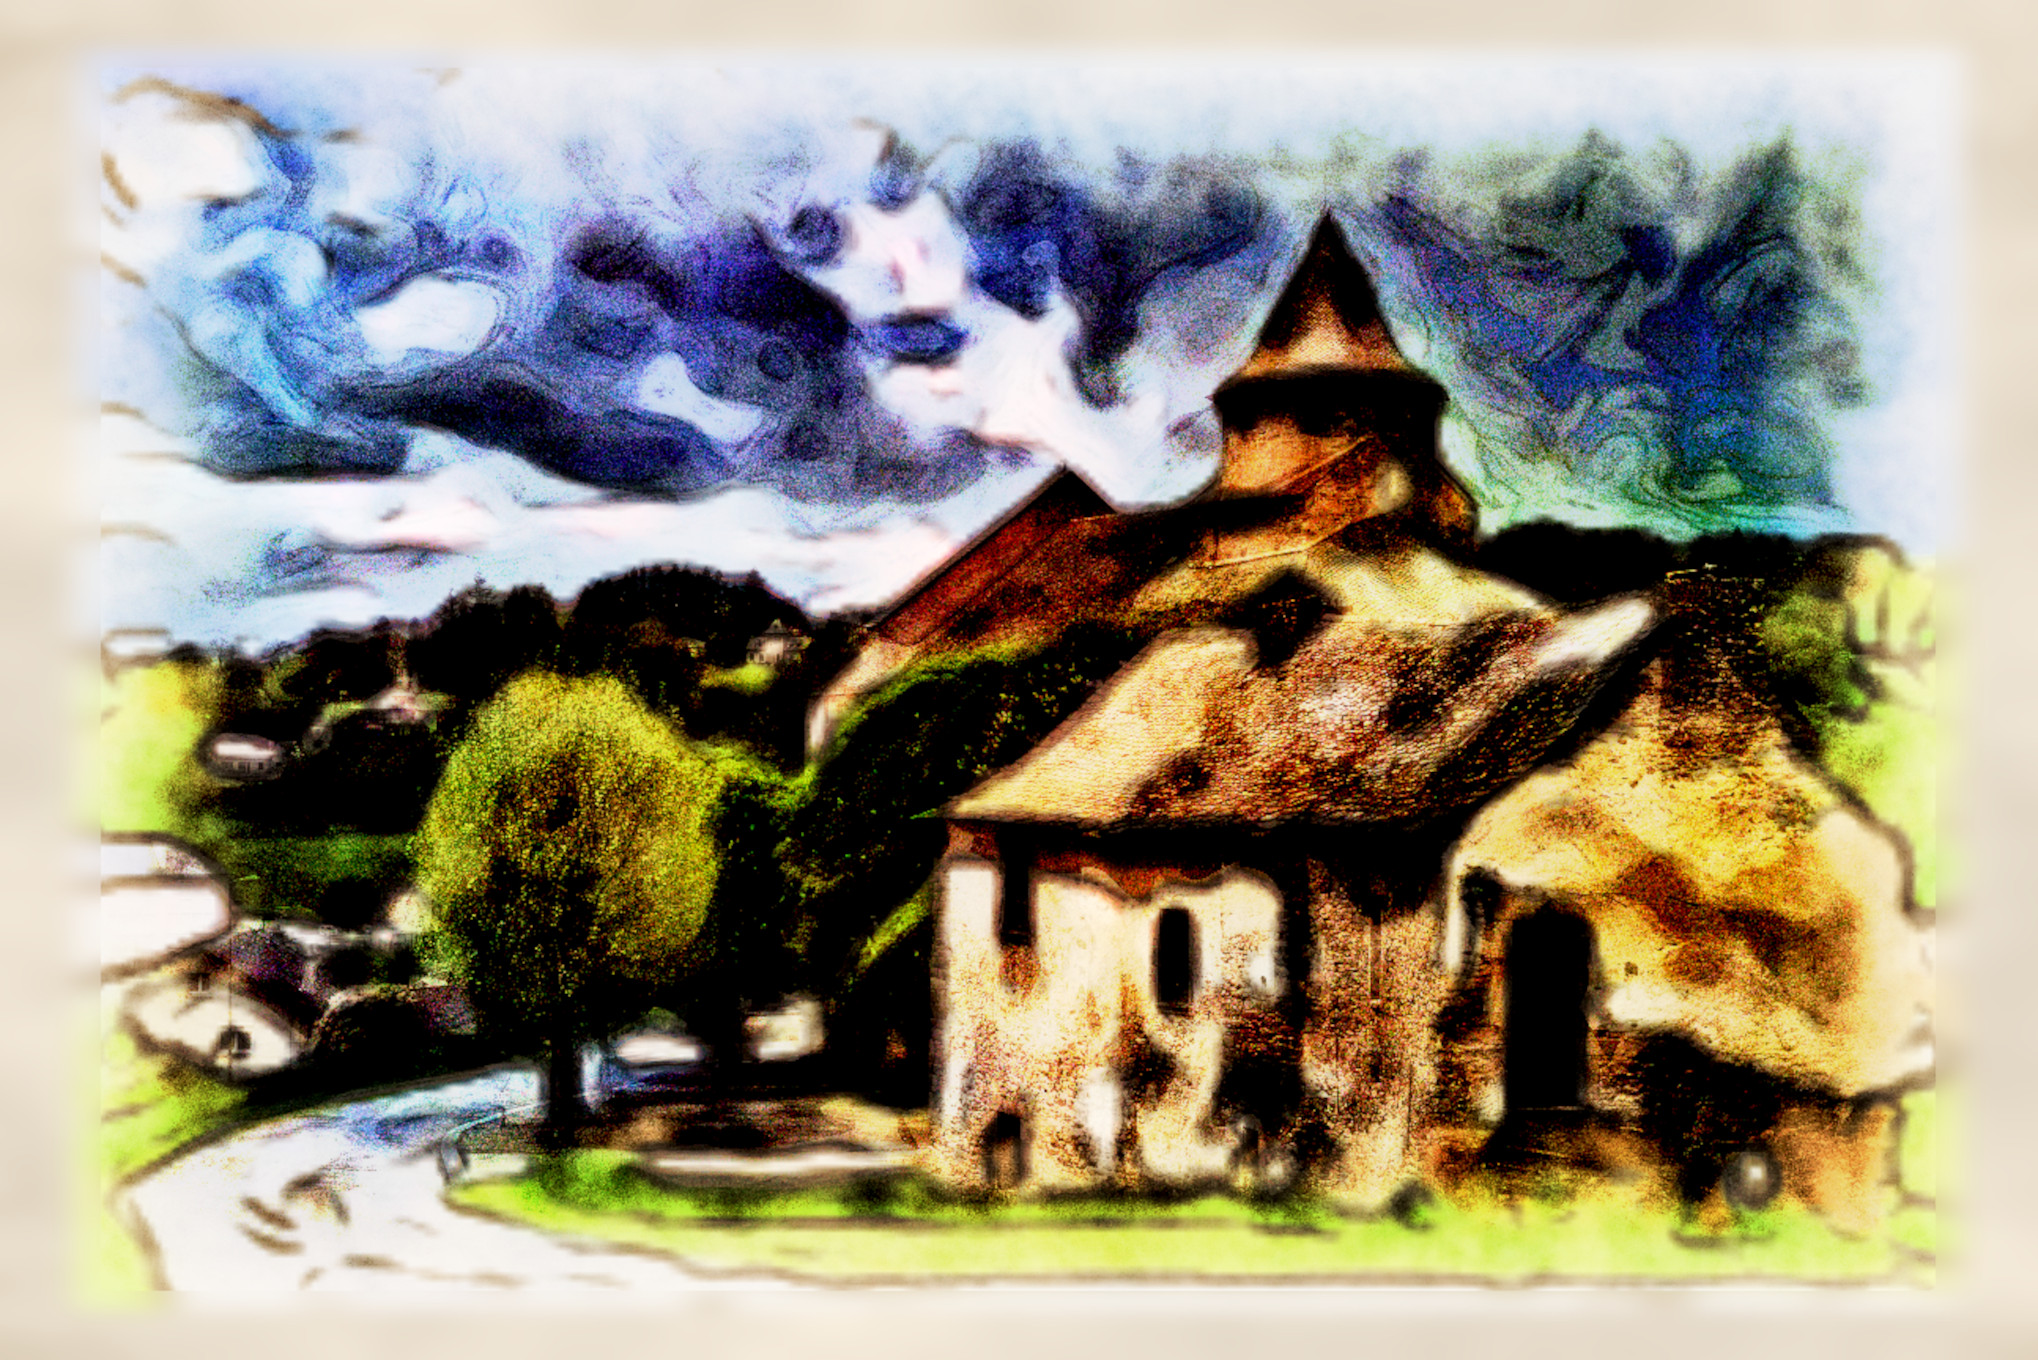 2023-10-02 18-54-01 church-7990916 with a Watercolor Pastels Effect 2023 (12.0,75.0,30.0,45.0,10.0,8.0,90.0,True,2).jpg